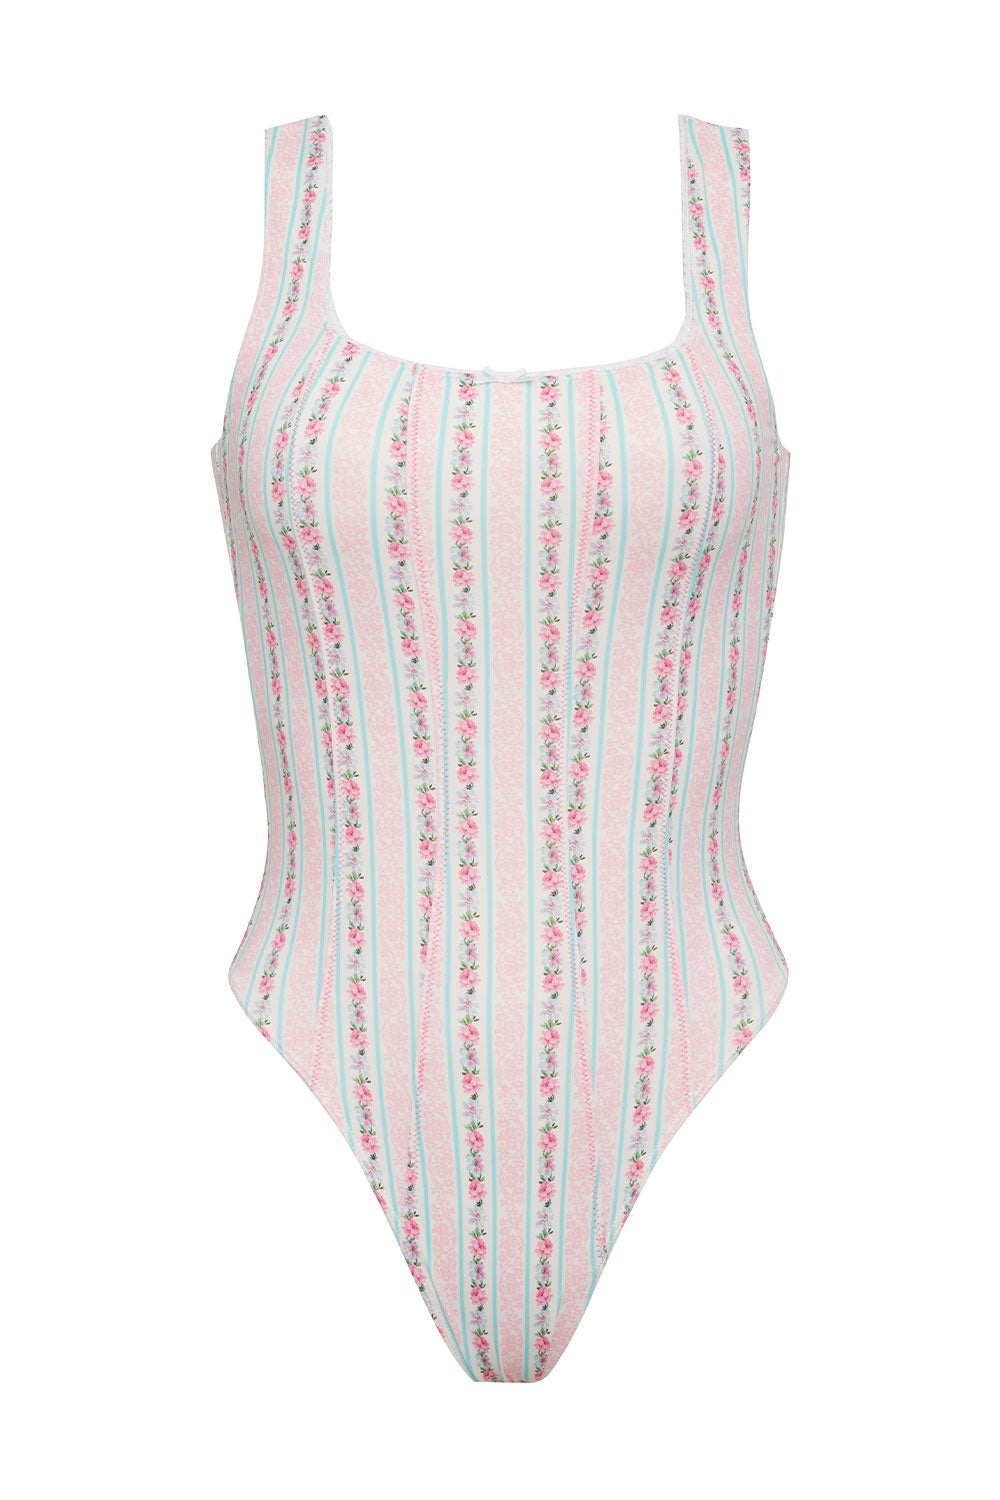 Etta Floral One Piece Swimsuit - French Holiday